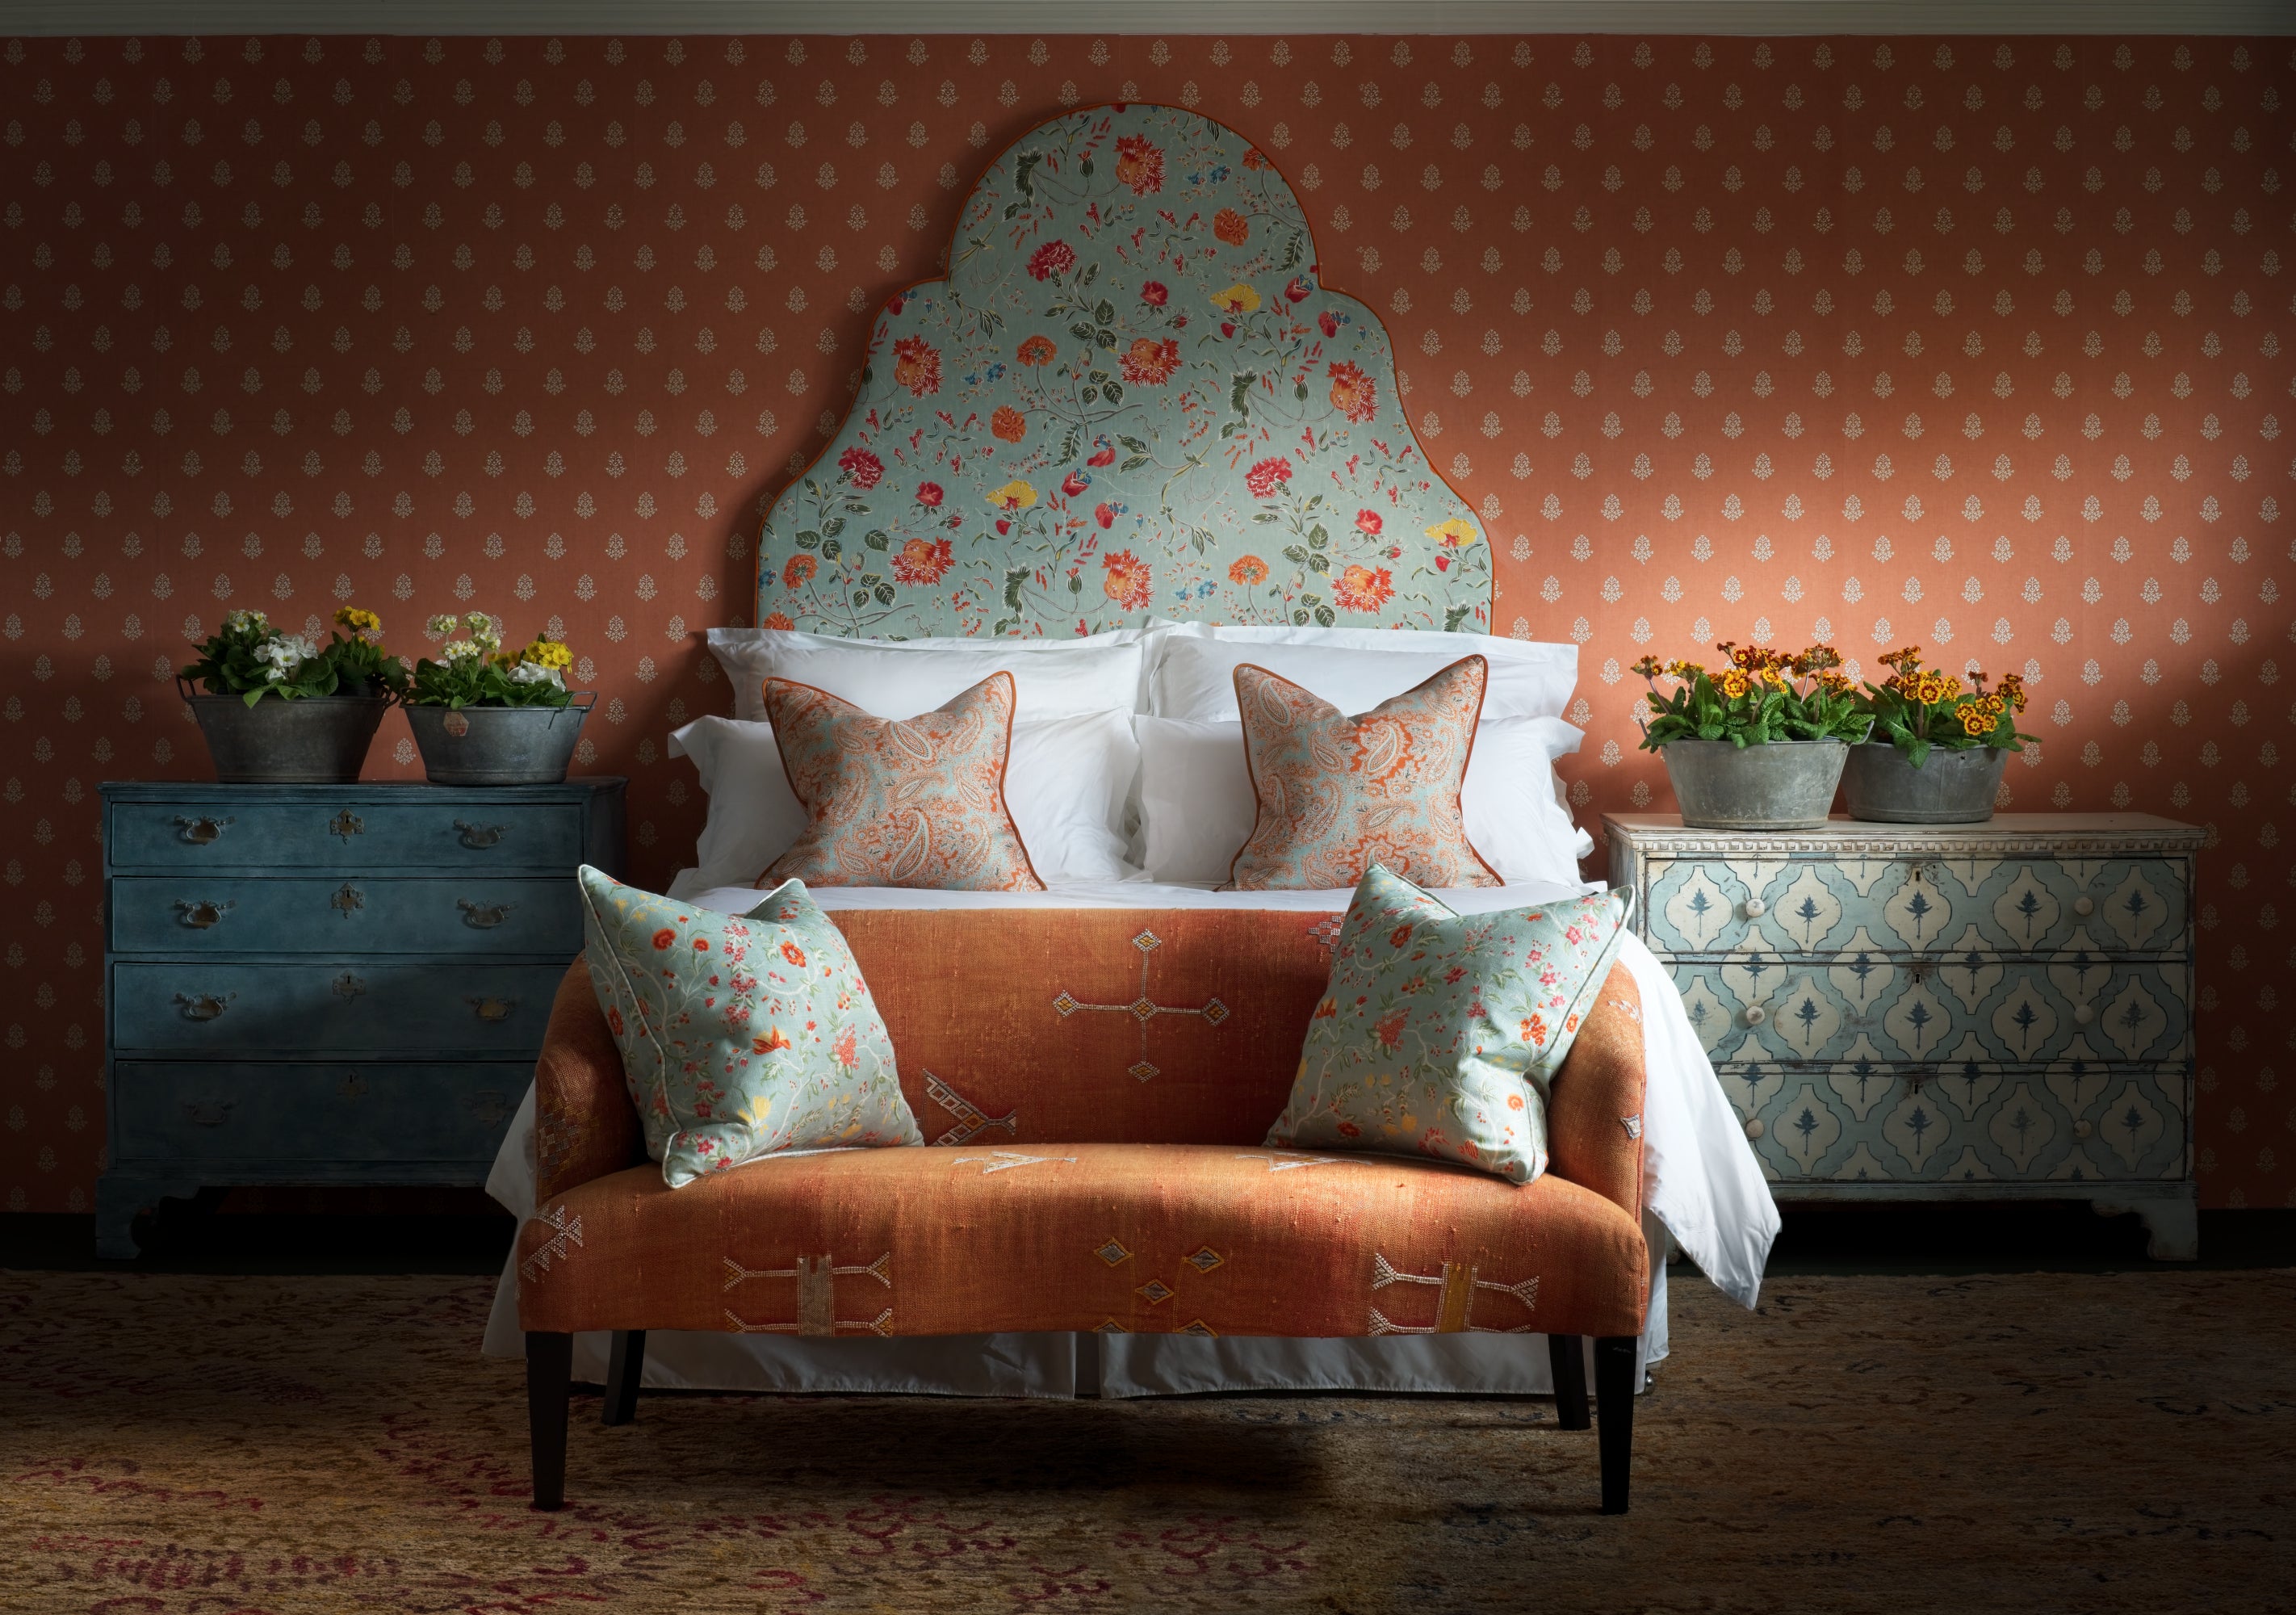 Back to nature: Andrew Martin’s Secret Garden collection